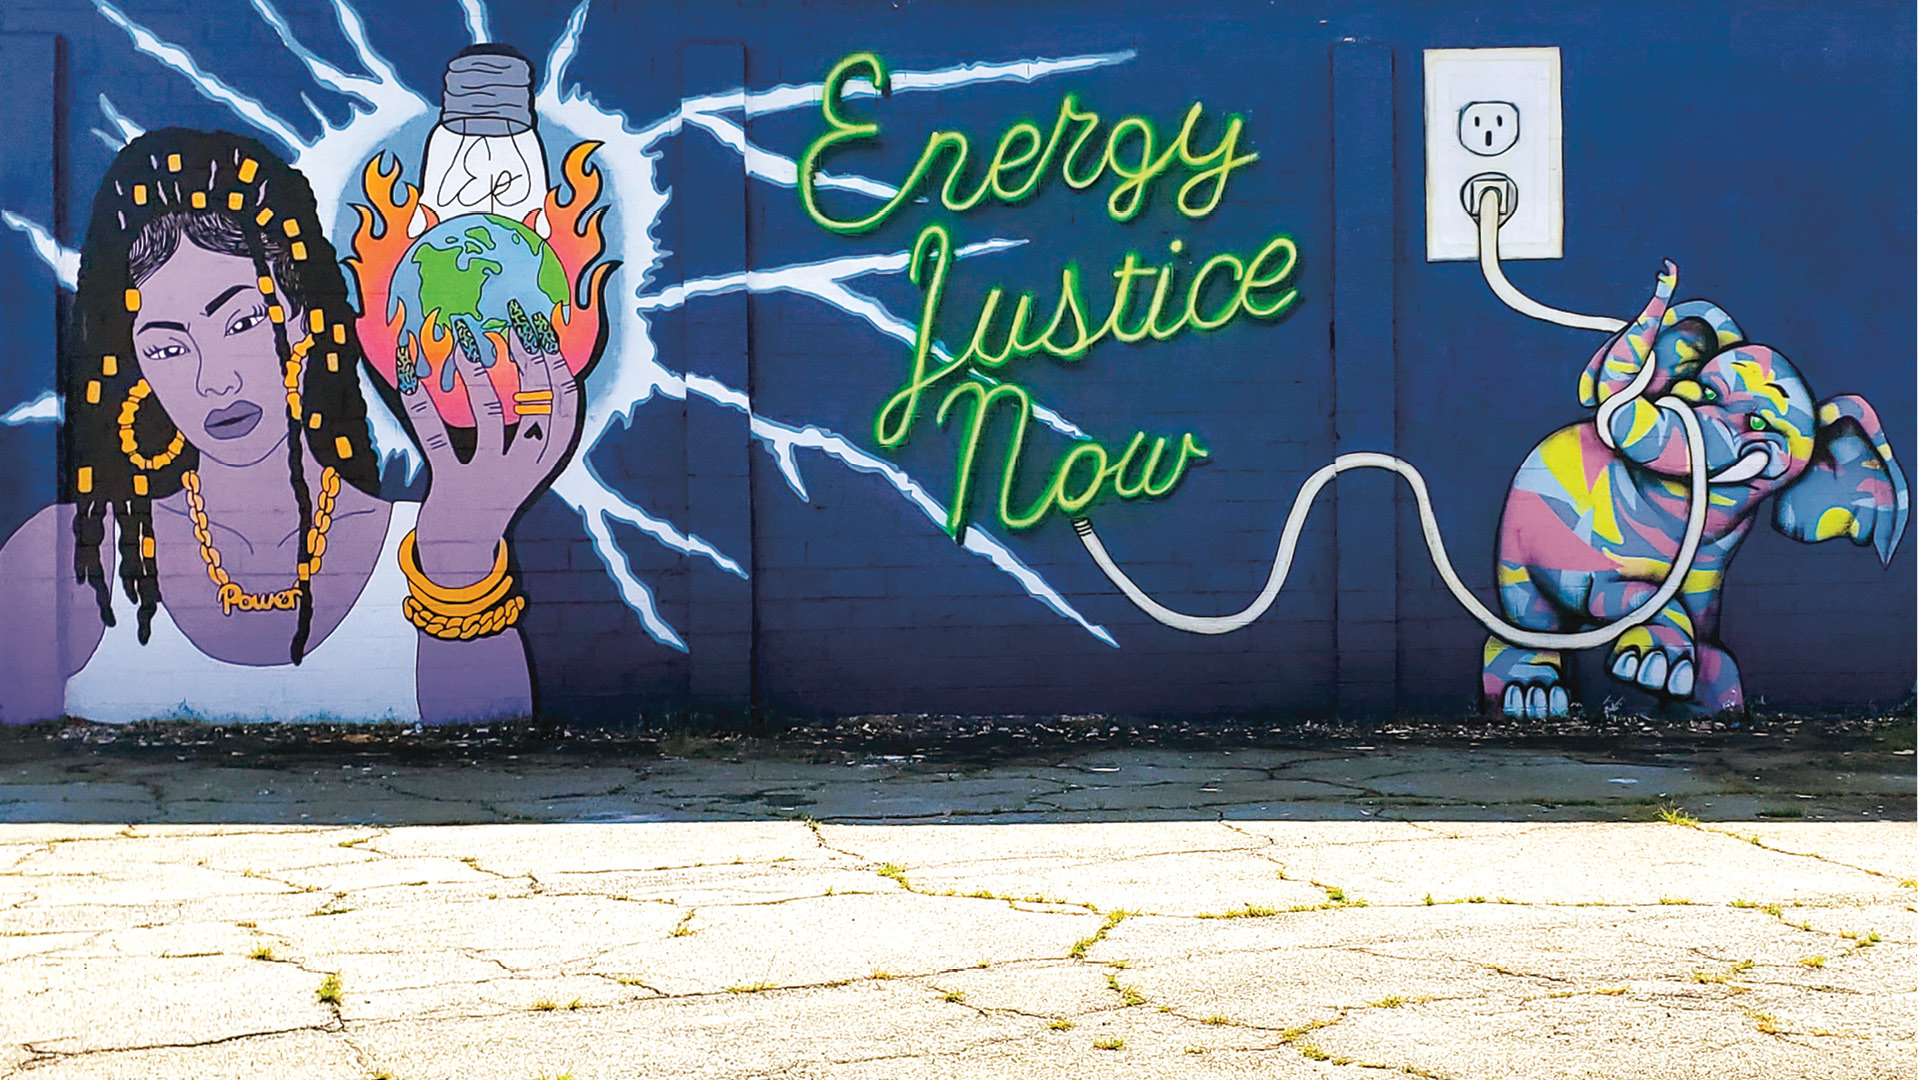 Painted mural that says "Energy Justice Now" 